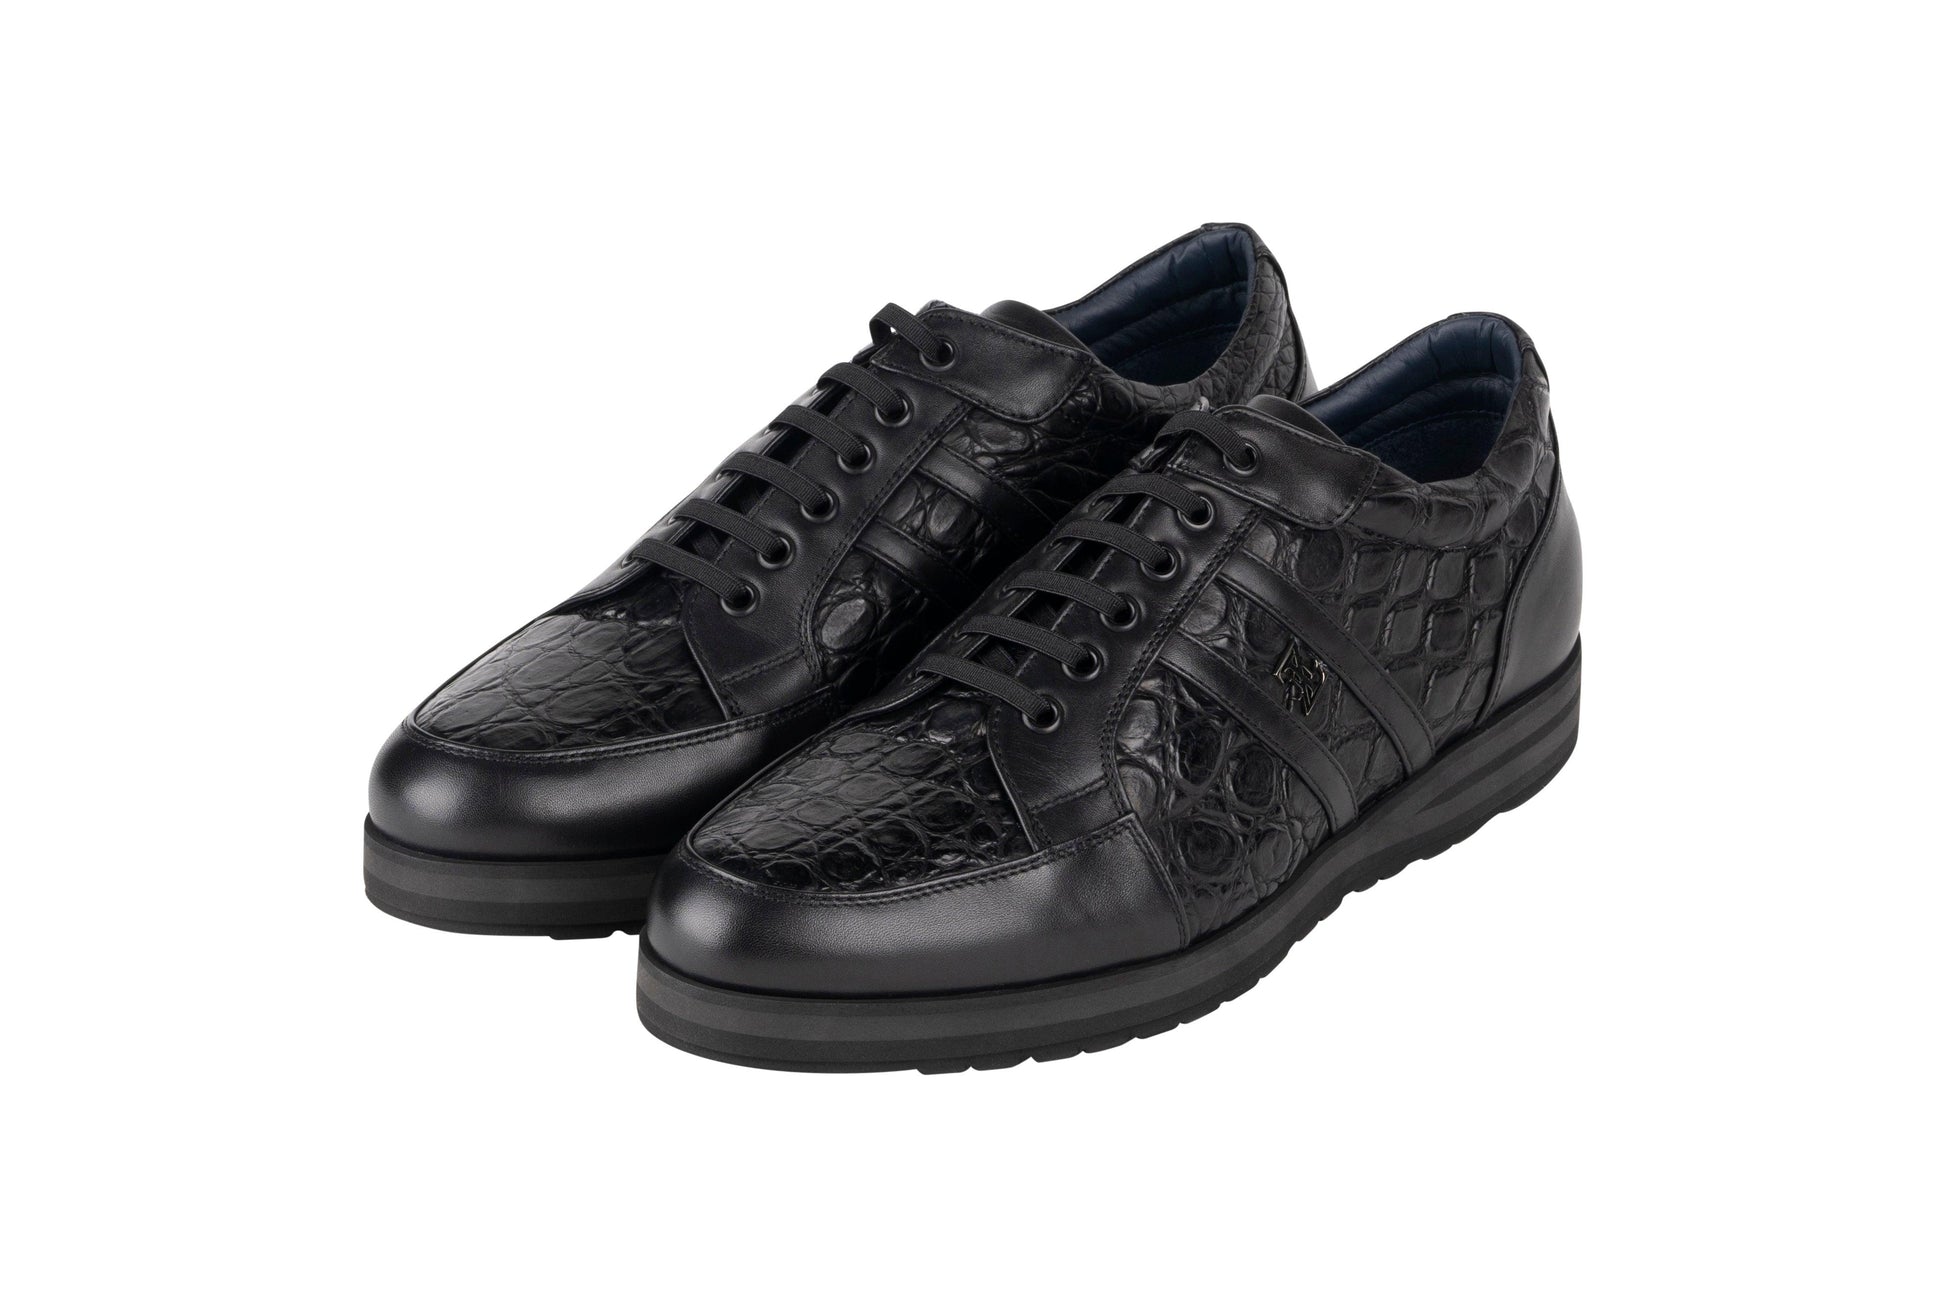 Black sneakers in caiman and calfskin - ZILLI